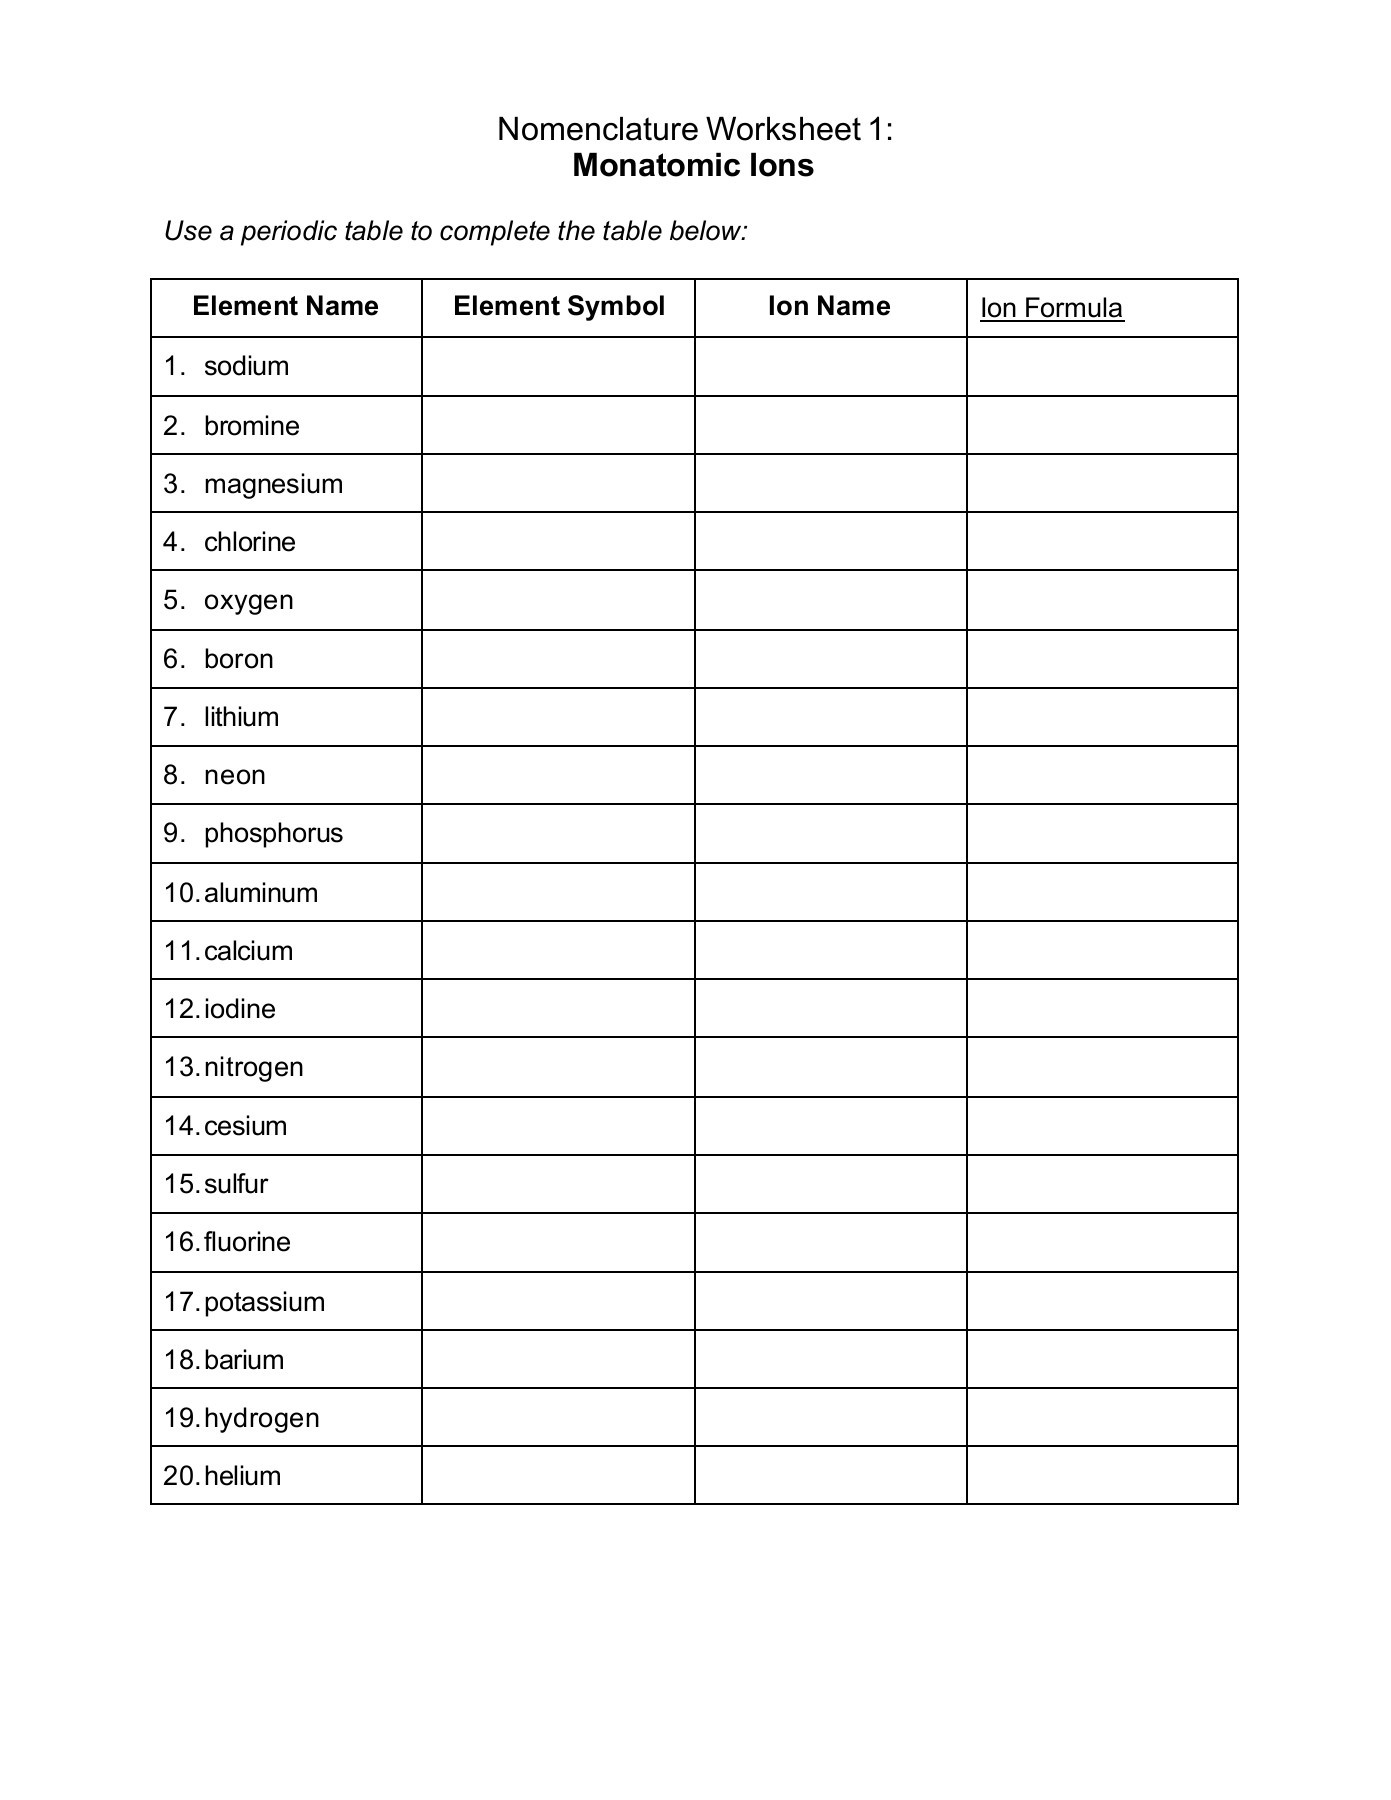 Atoms Vs Ions Worksheet Monatomic Ions Academic Puter Center Pages 1 12